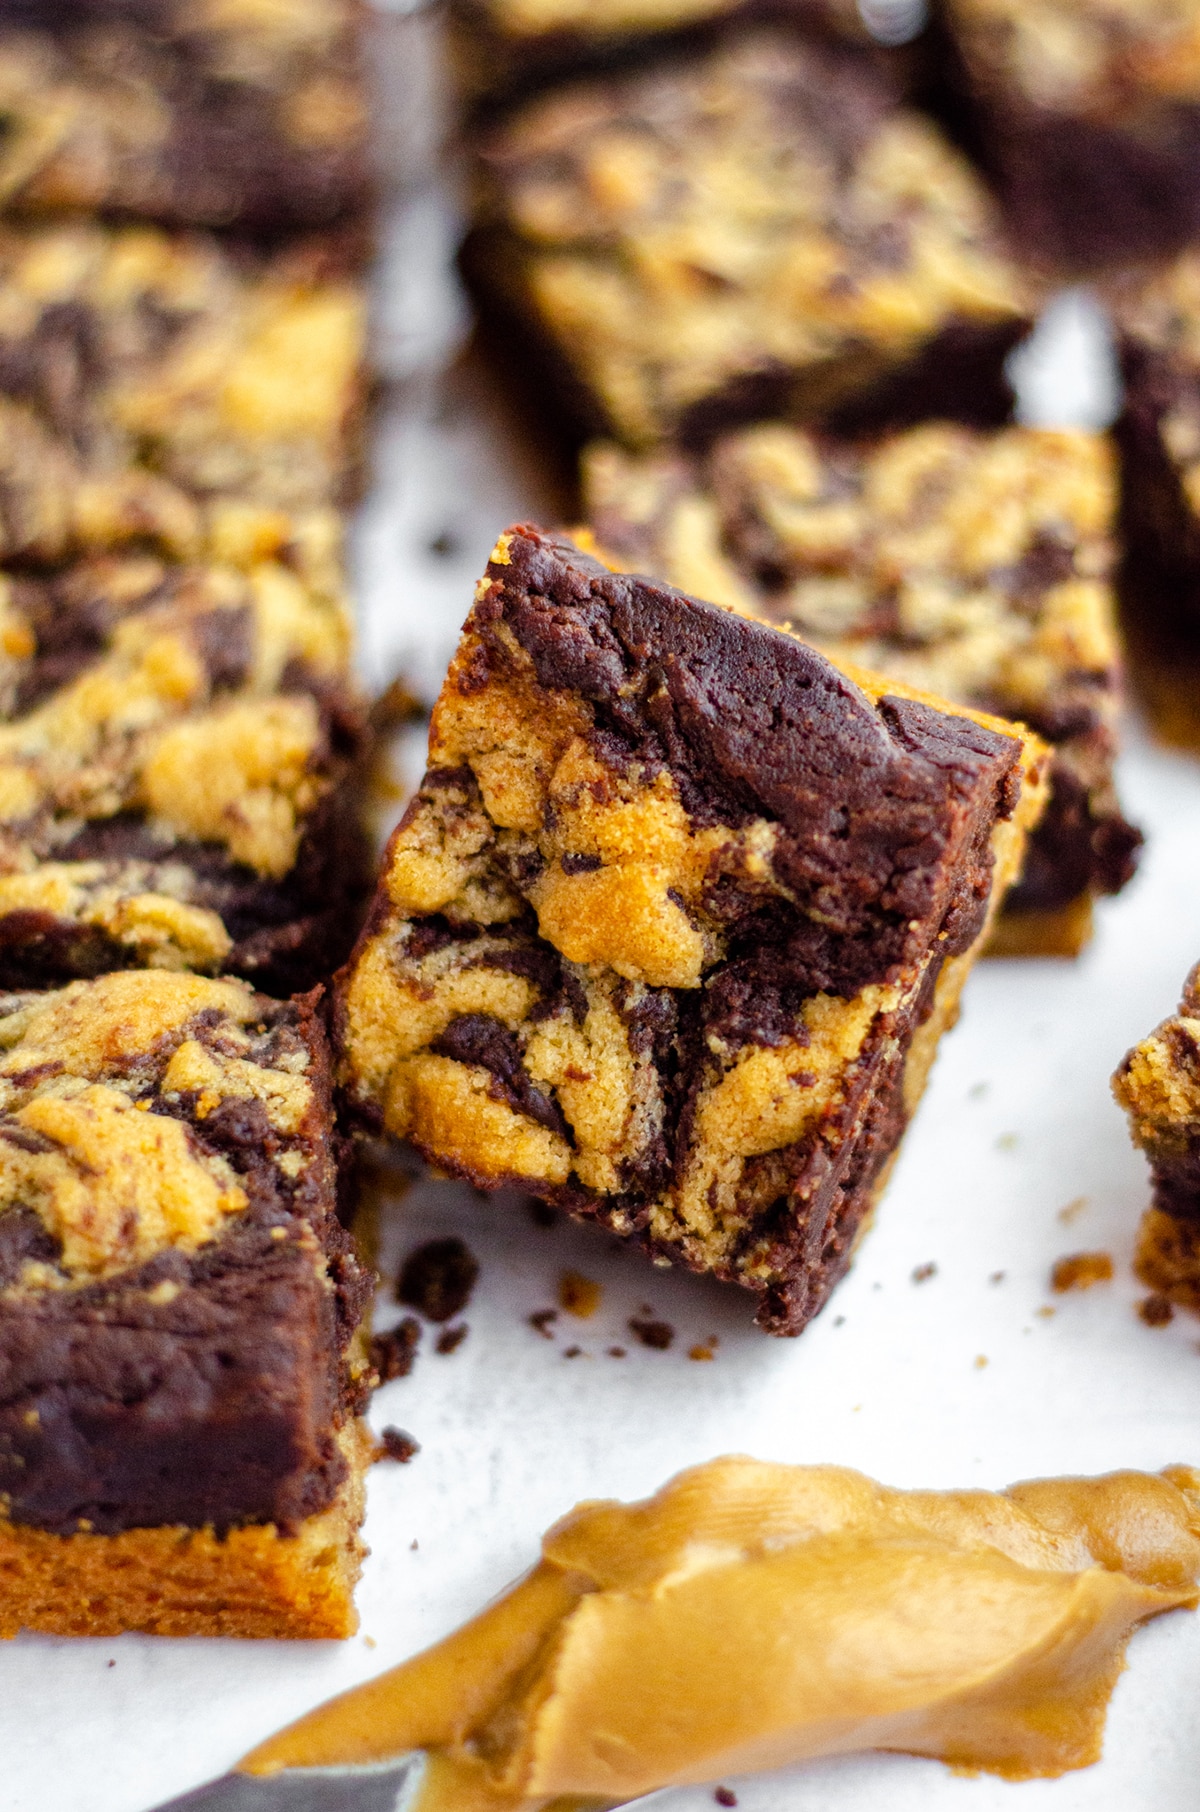 Peanut Butter Cookie Brownies: Soft and chewy brownies sit atop a peanut butter cookie crust and get swirled with peanut butter cookie batter to create peanut butter brownies unlike any other!